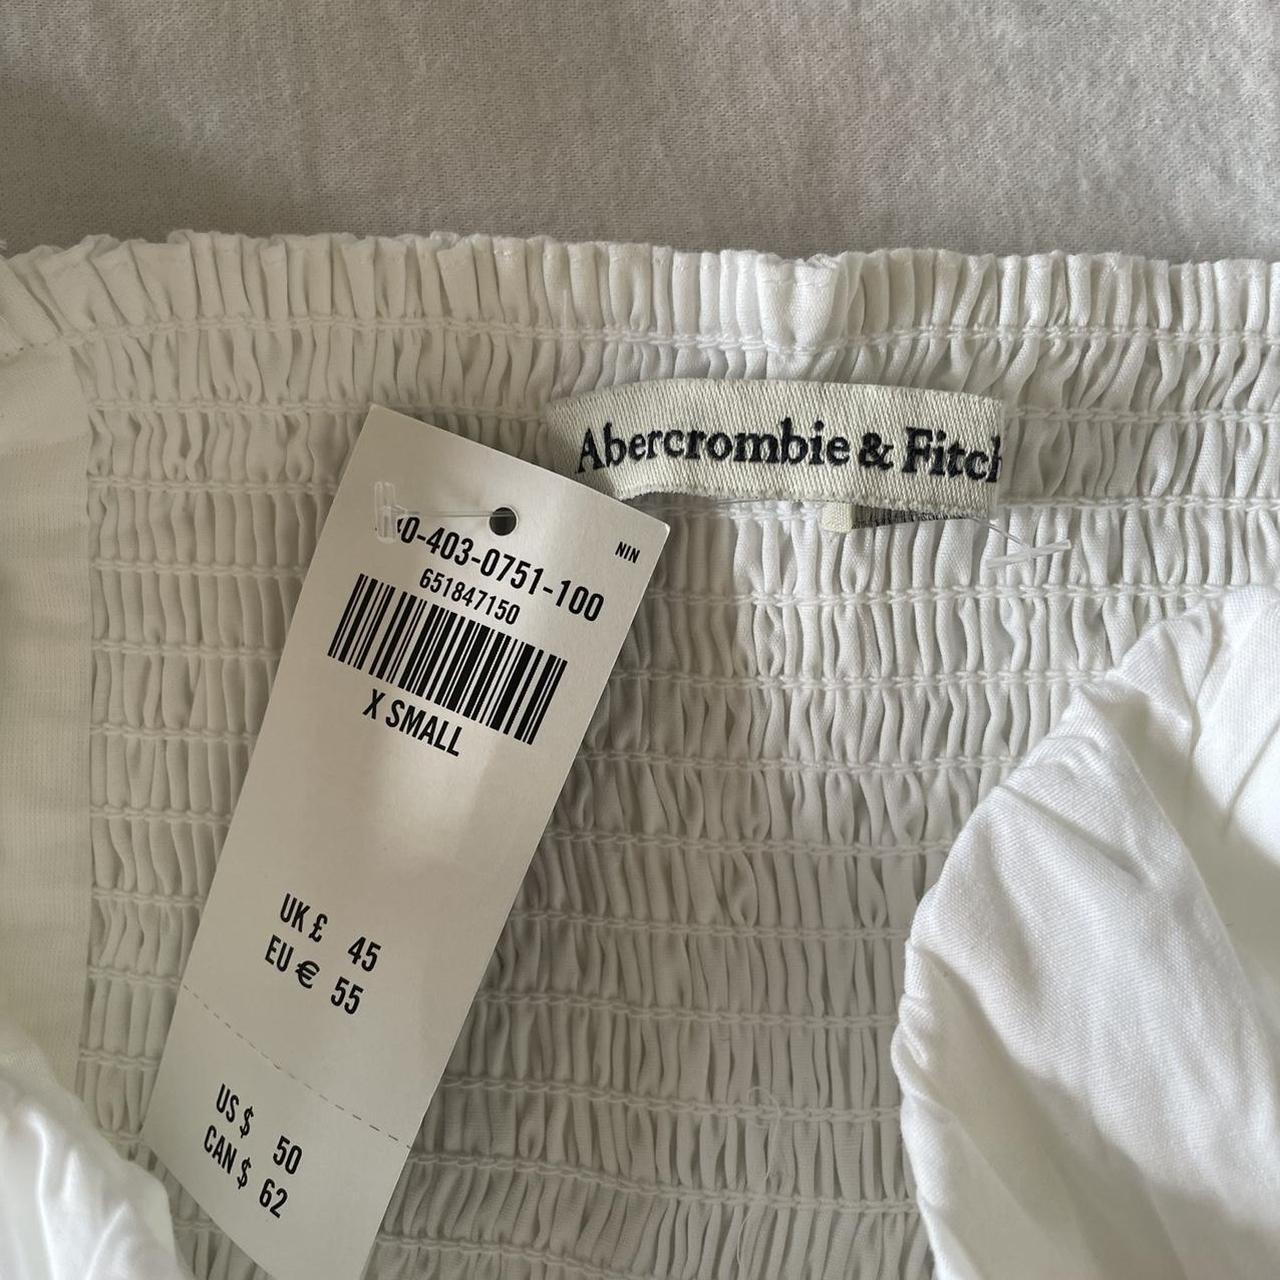 Brand new with tags Abercrombie and fitch white top... - Depop